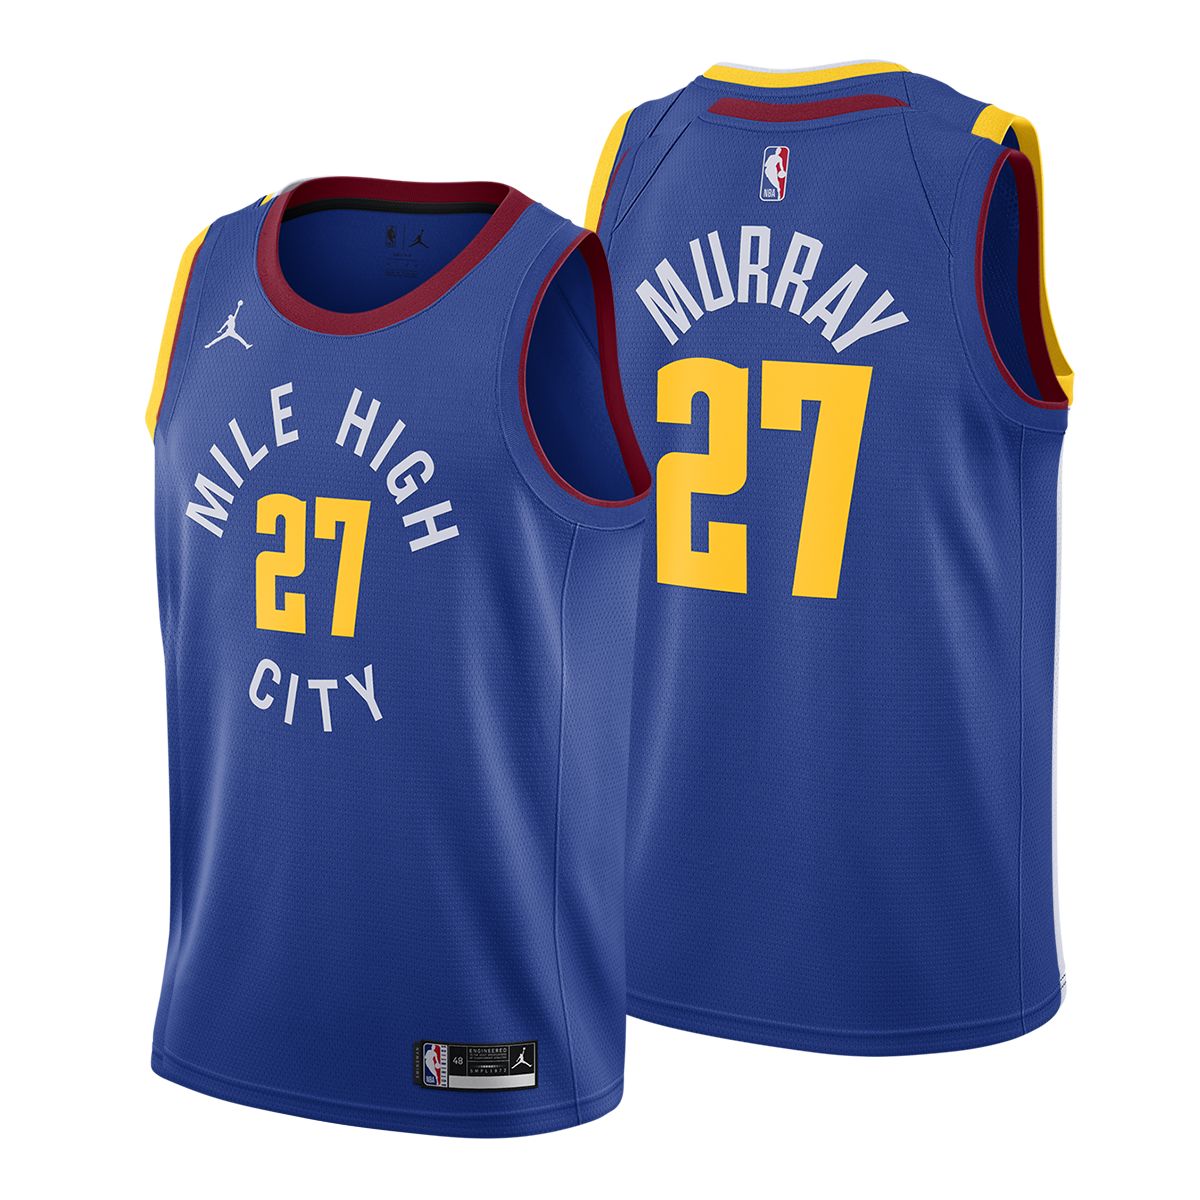 From simple to iconic, take a look at the Nuggets' jerseys through